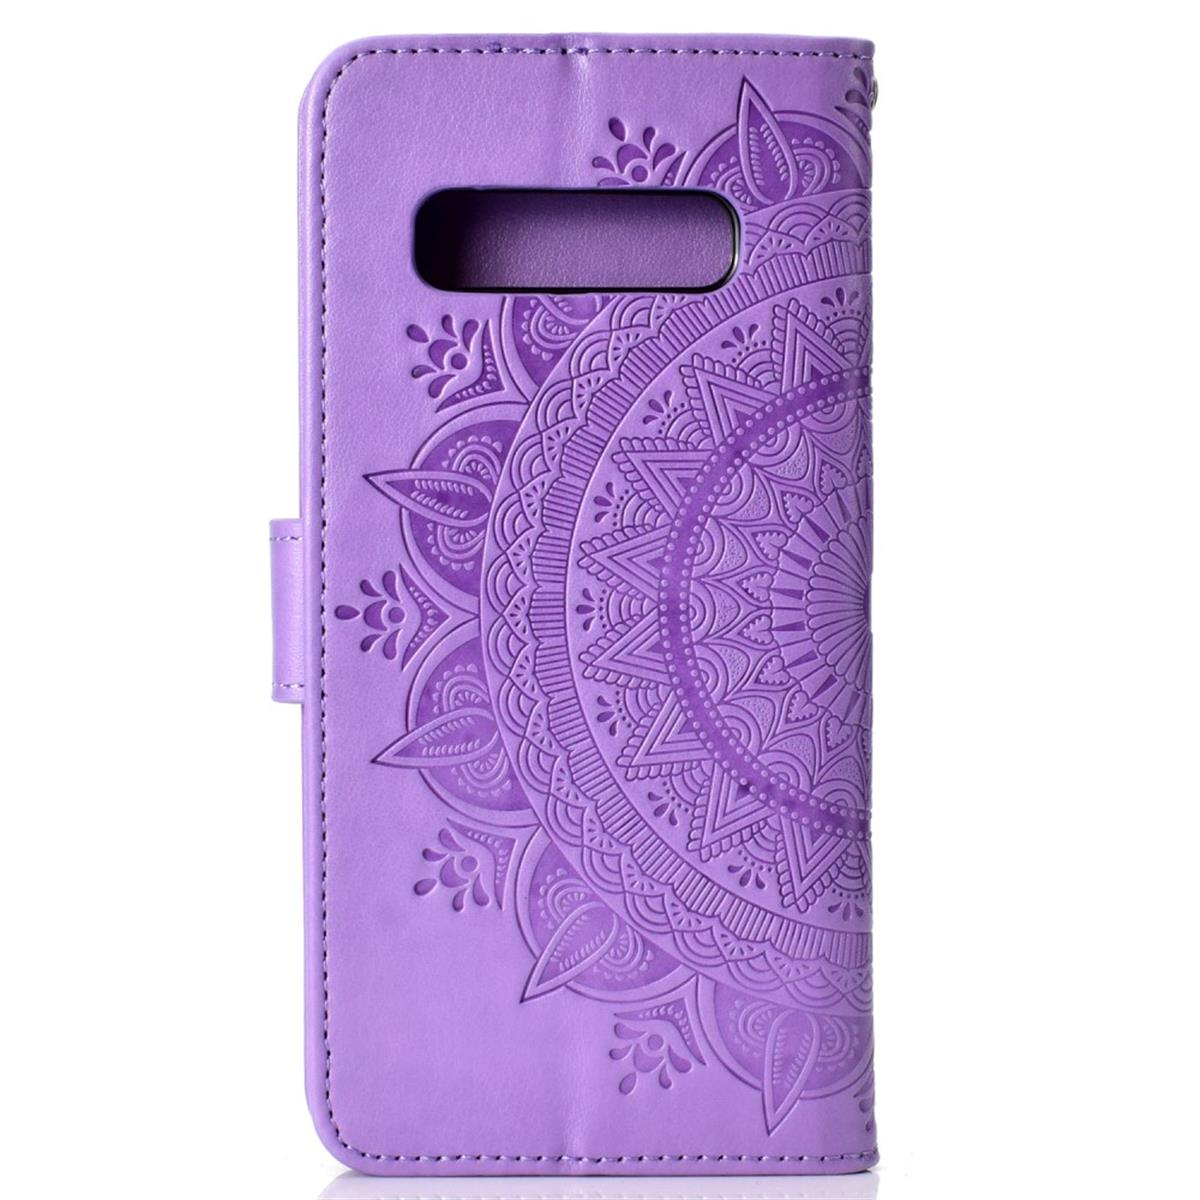 COVERKINGZ Klapphülle S10, Muster, Lila Galaxy Mandala Bookcover, Samsung, mit